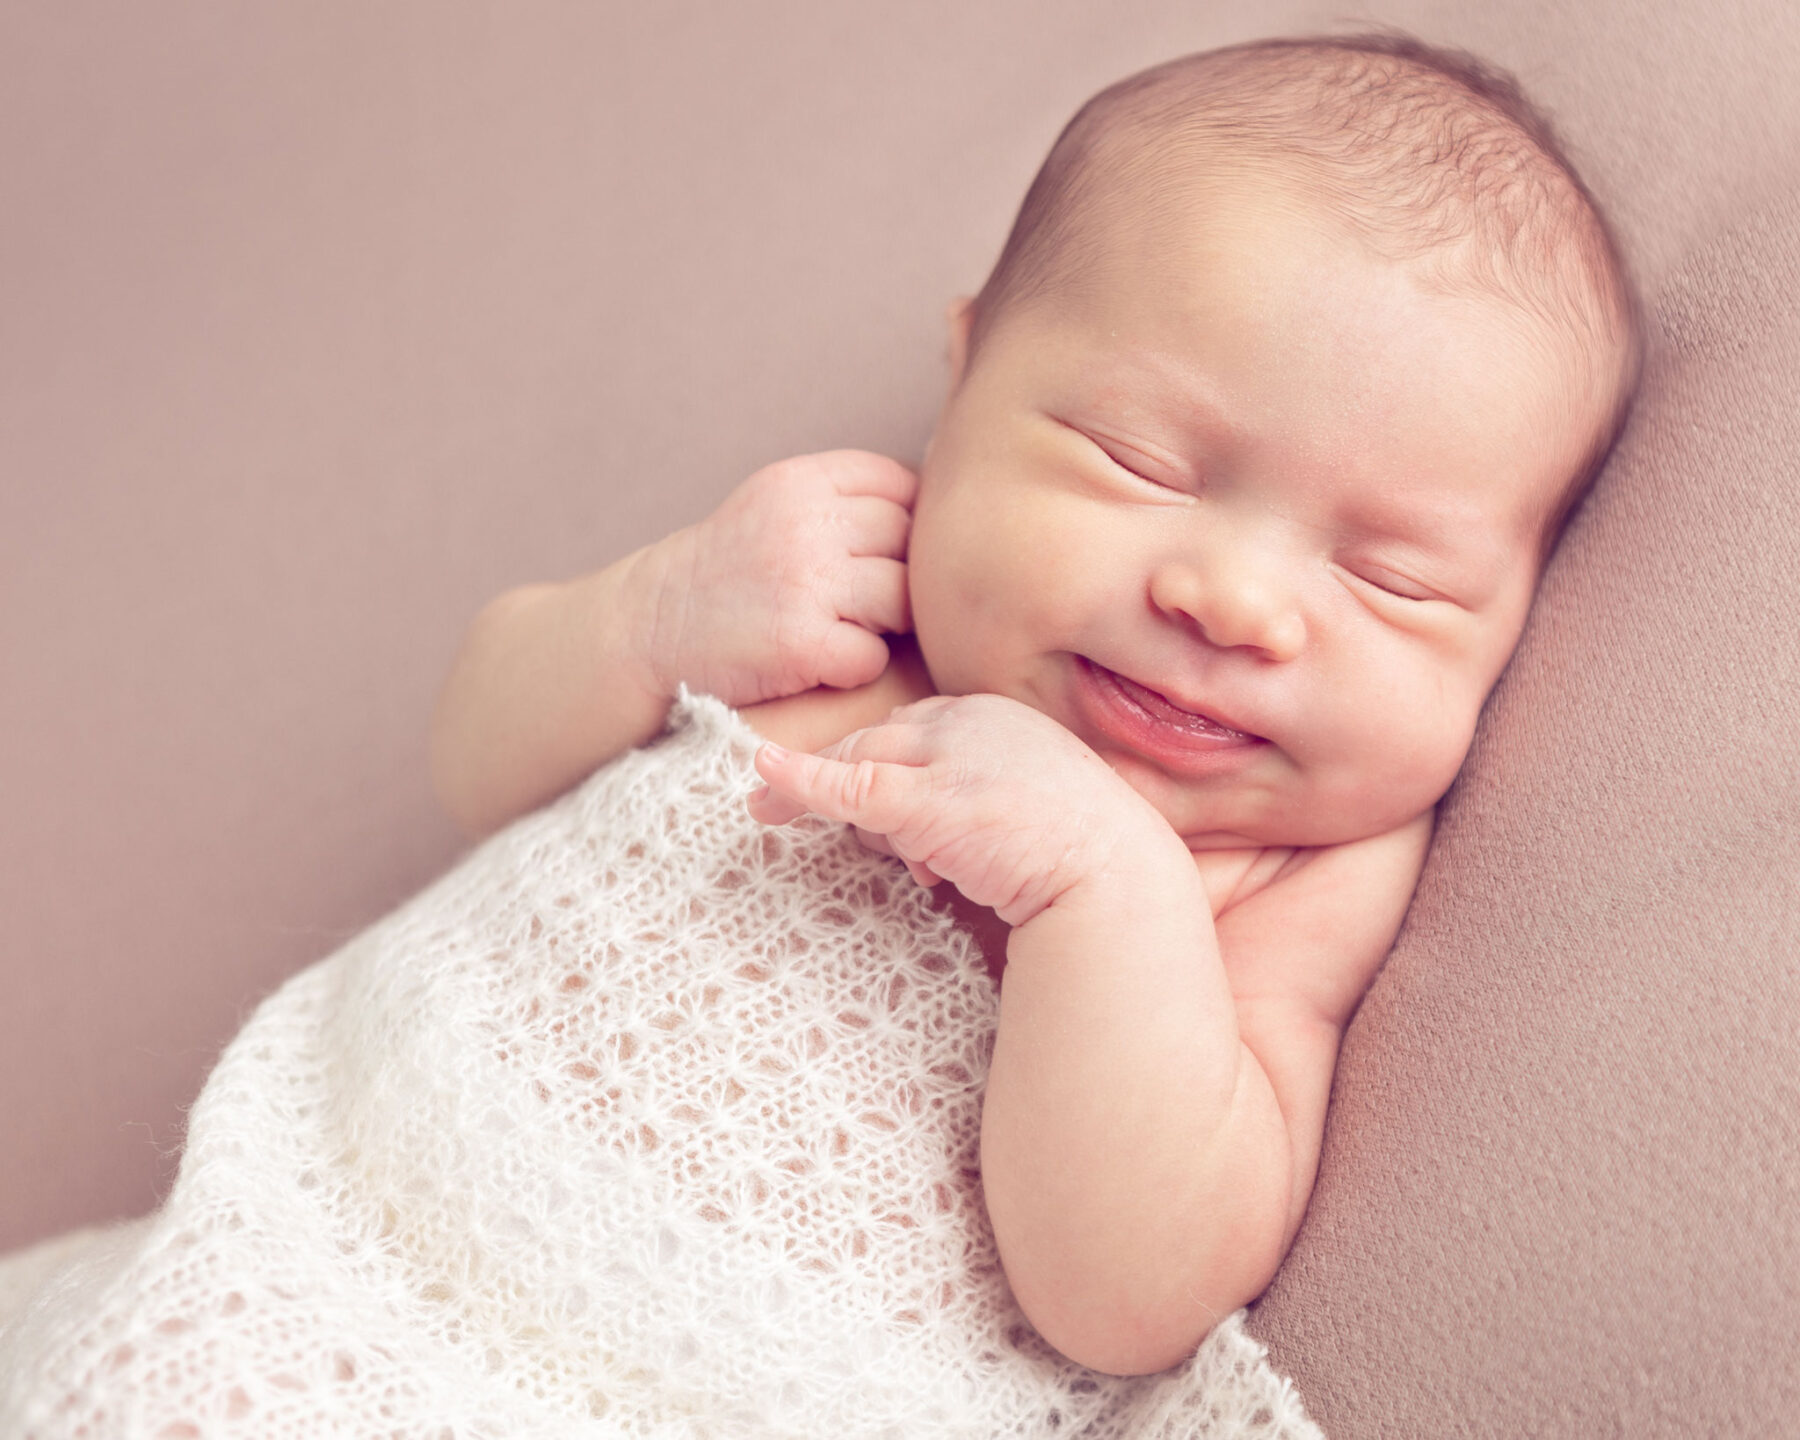 Newborn photography of a baby girl with a sweet smile in a white blanket